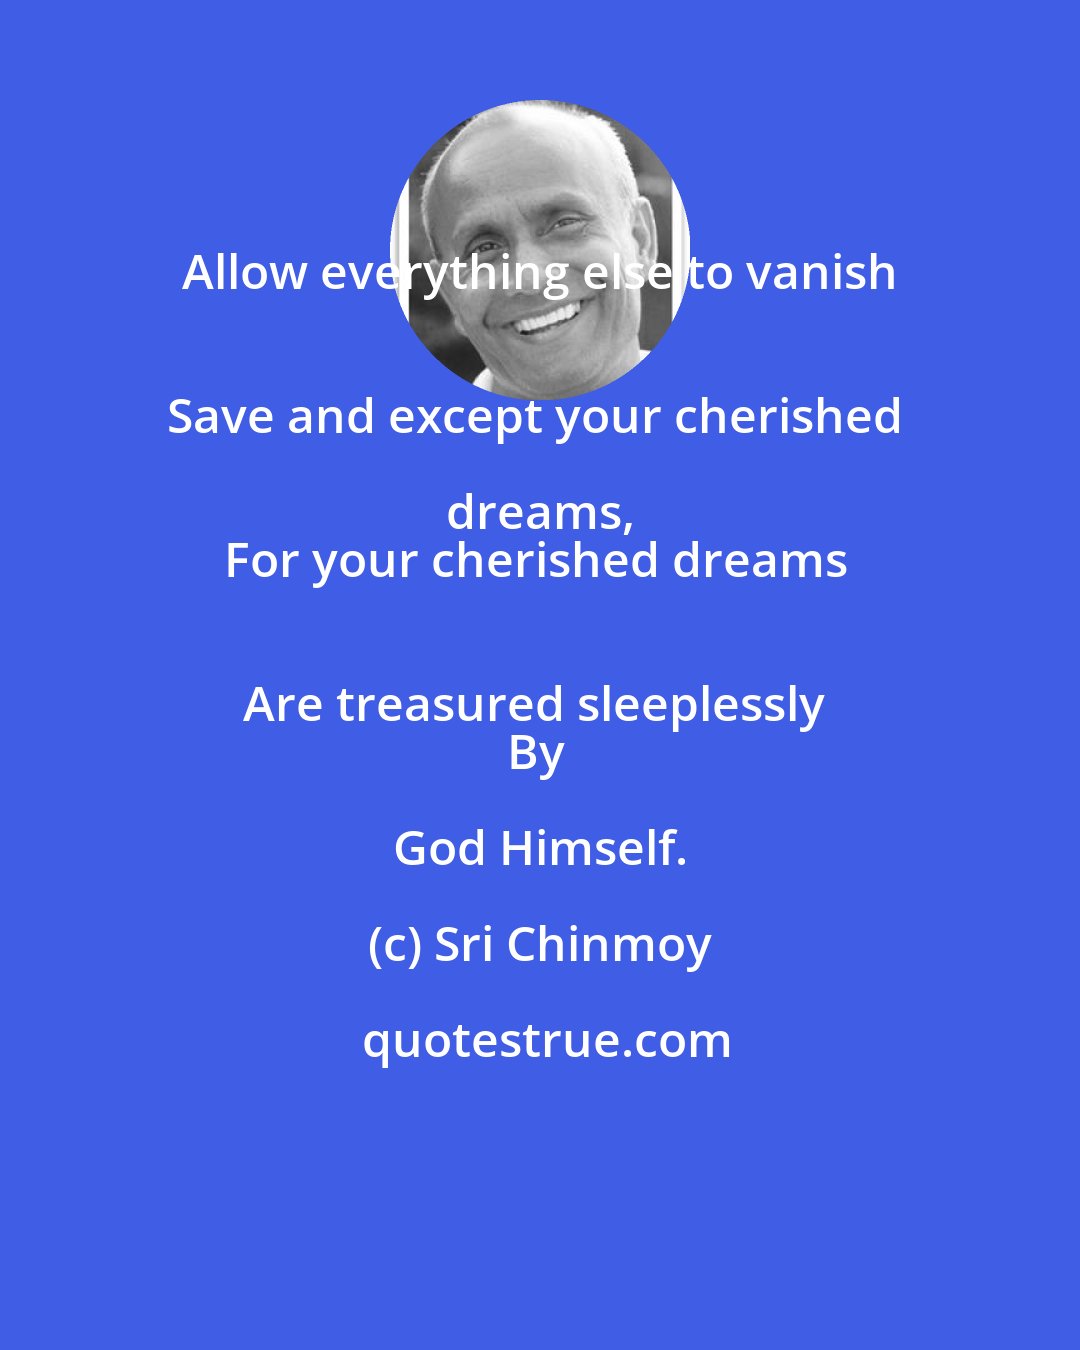 Sri Chinmoy: Allow everything else to vanish 
Save and except your cherished dreams, 
For your cherished dreams 
Are treasured sleeplessly 
By God Himself.